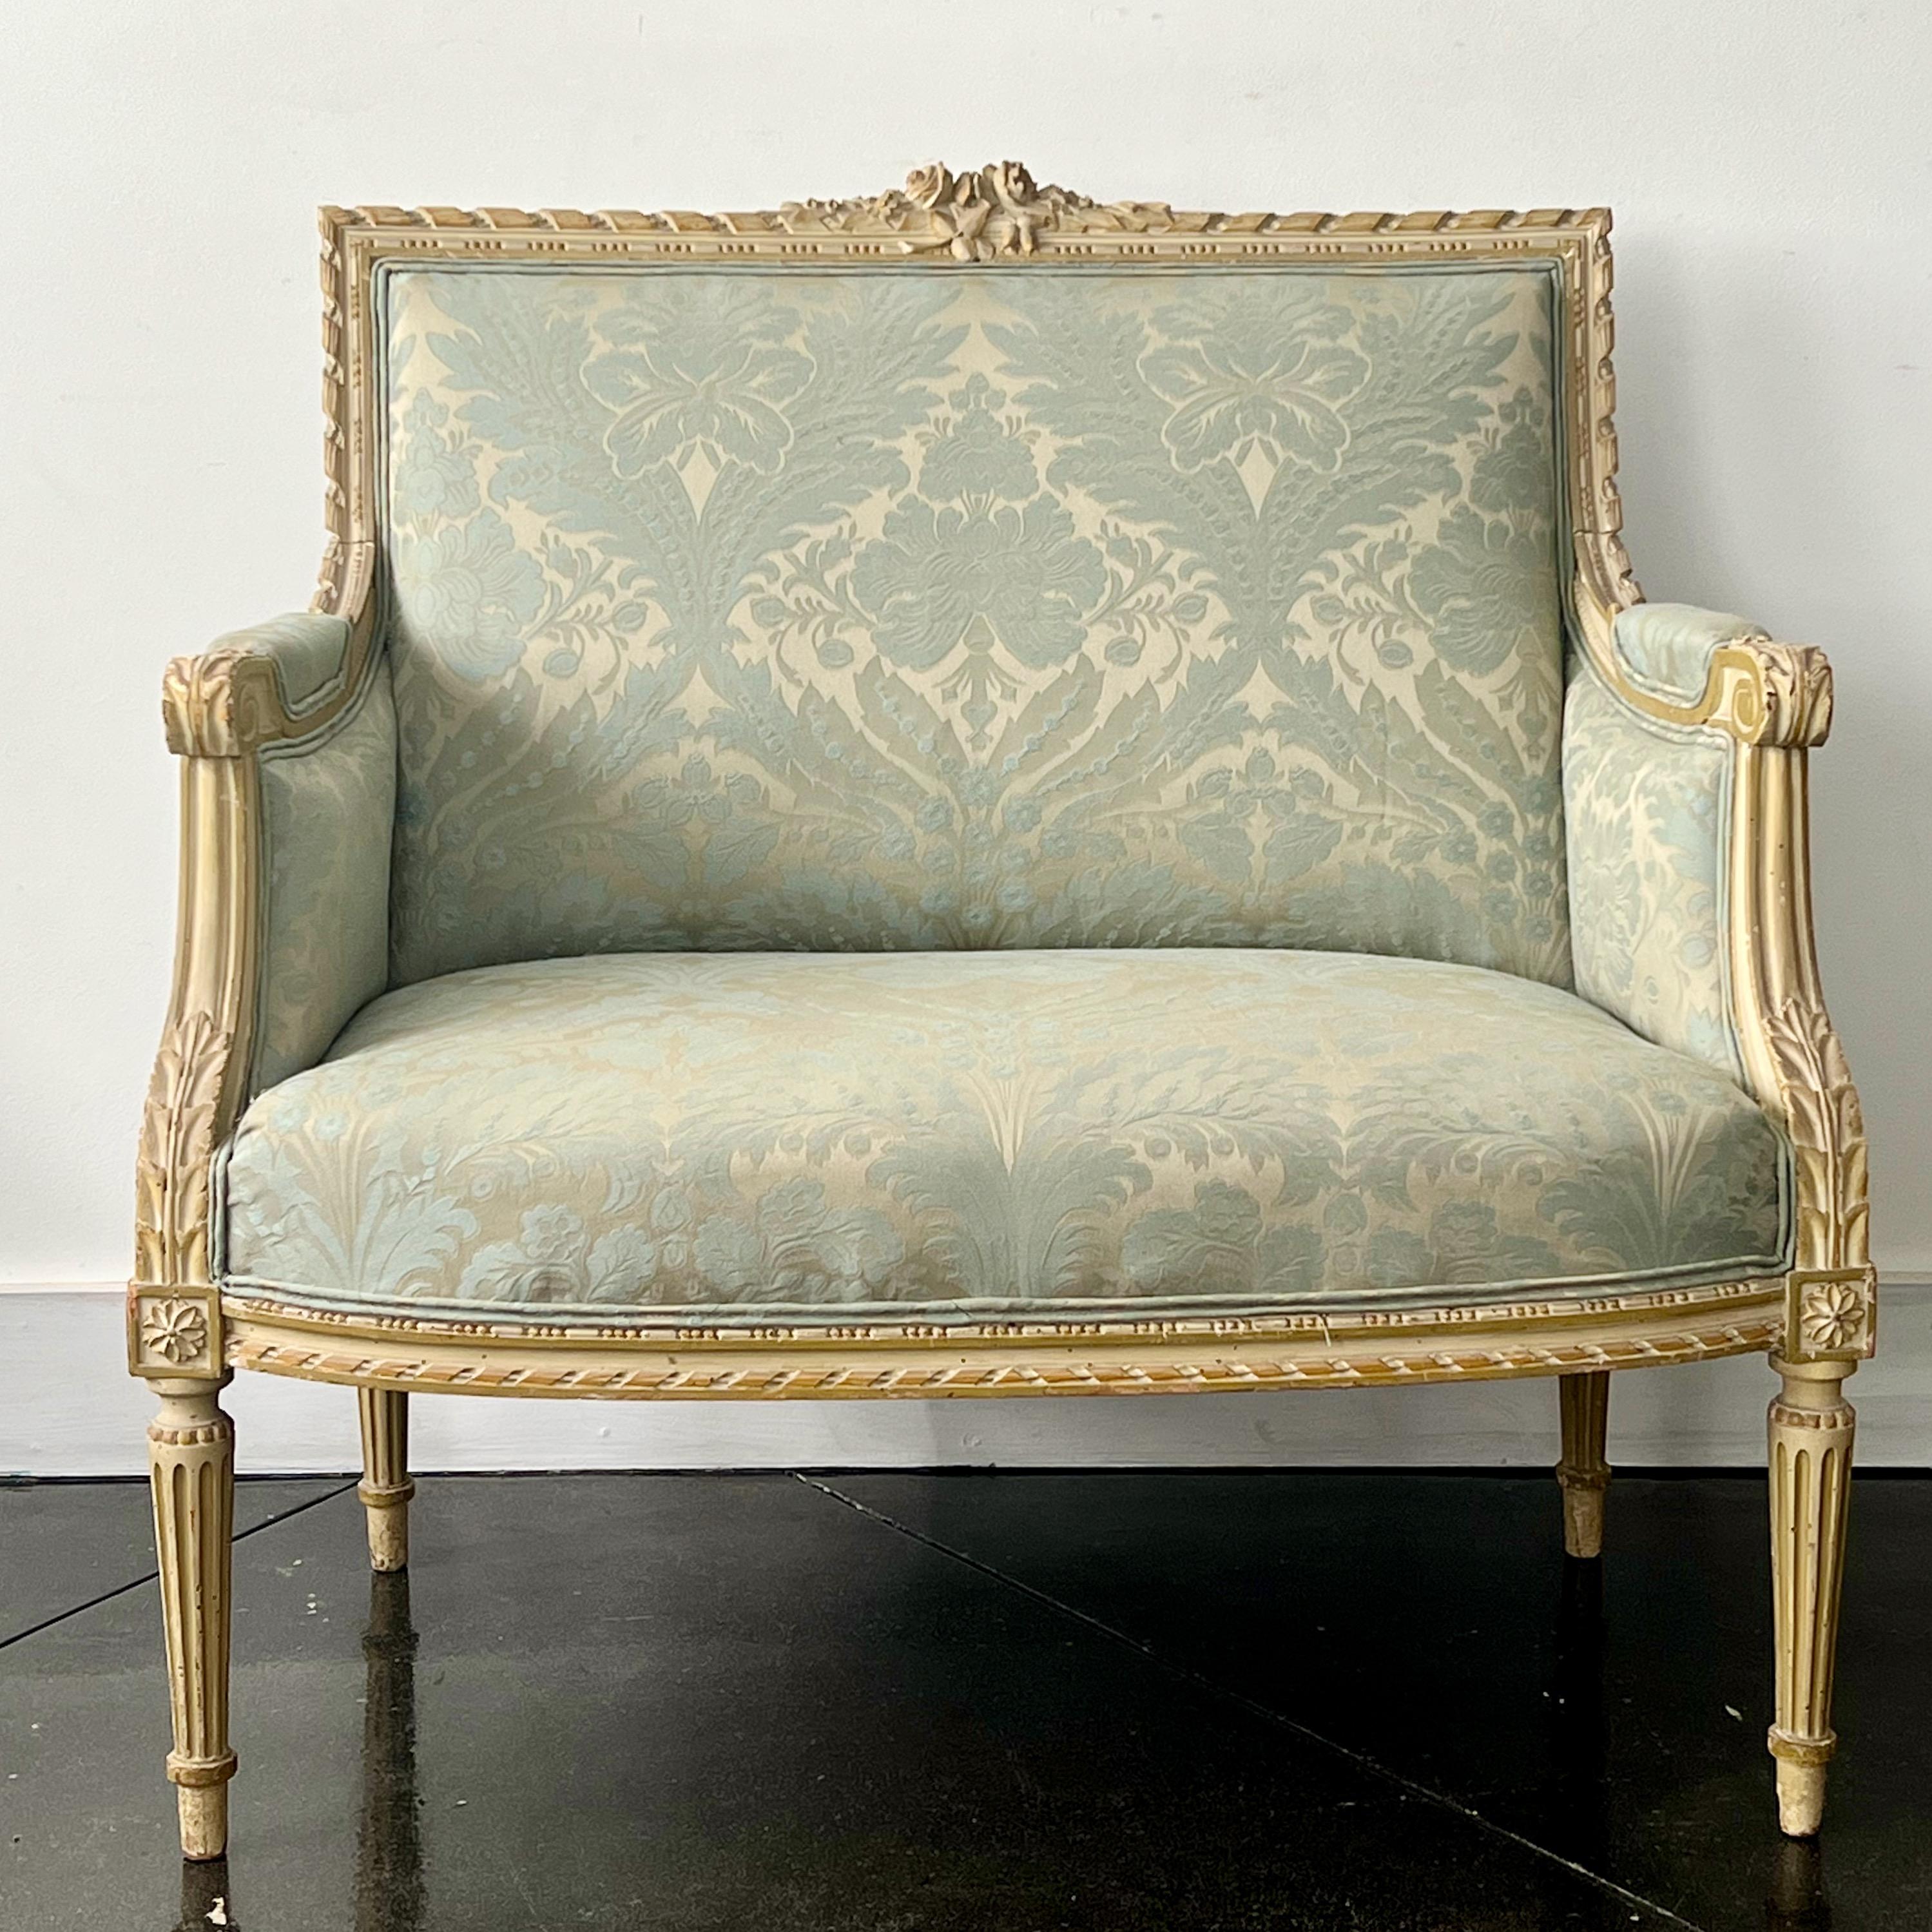 19th century French Louis XVI style bergère marquise upholstered armchair in painted wood frame with neoclassical architecture embellished hand-carved foliates, rosettes and tapered and fluted legs. Newly upholstered in floral damask. 
A classic